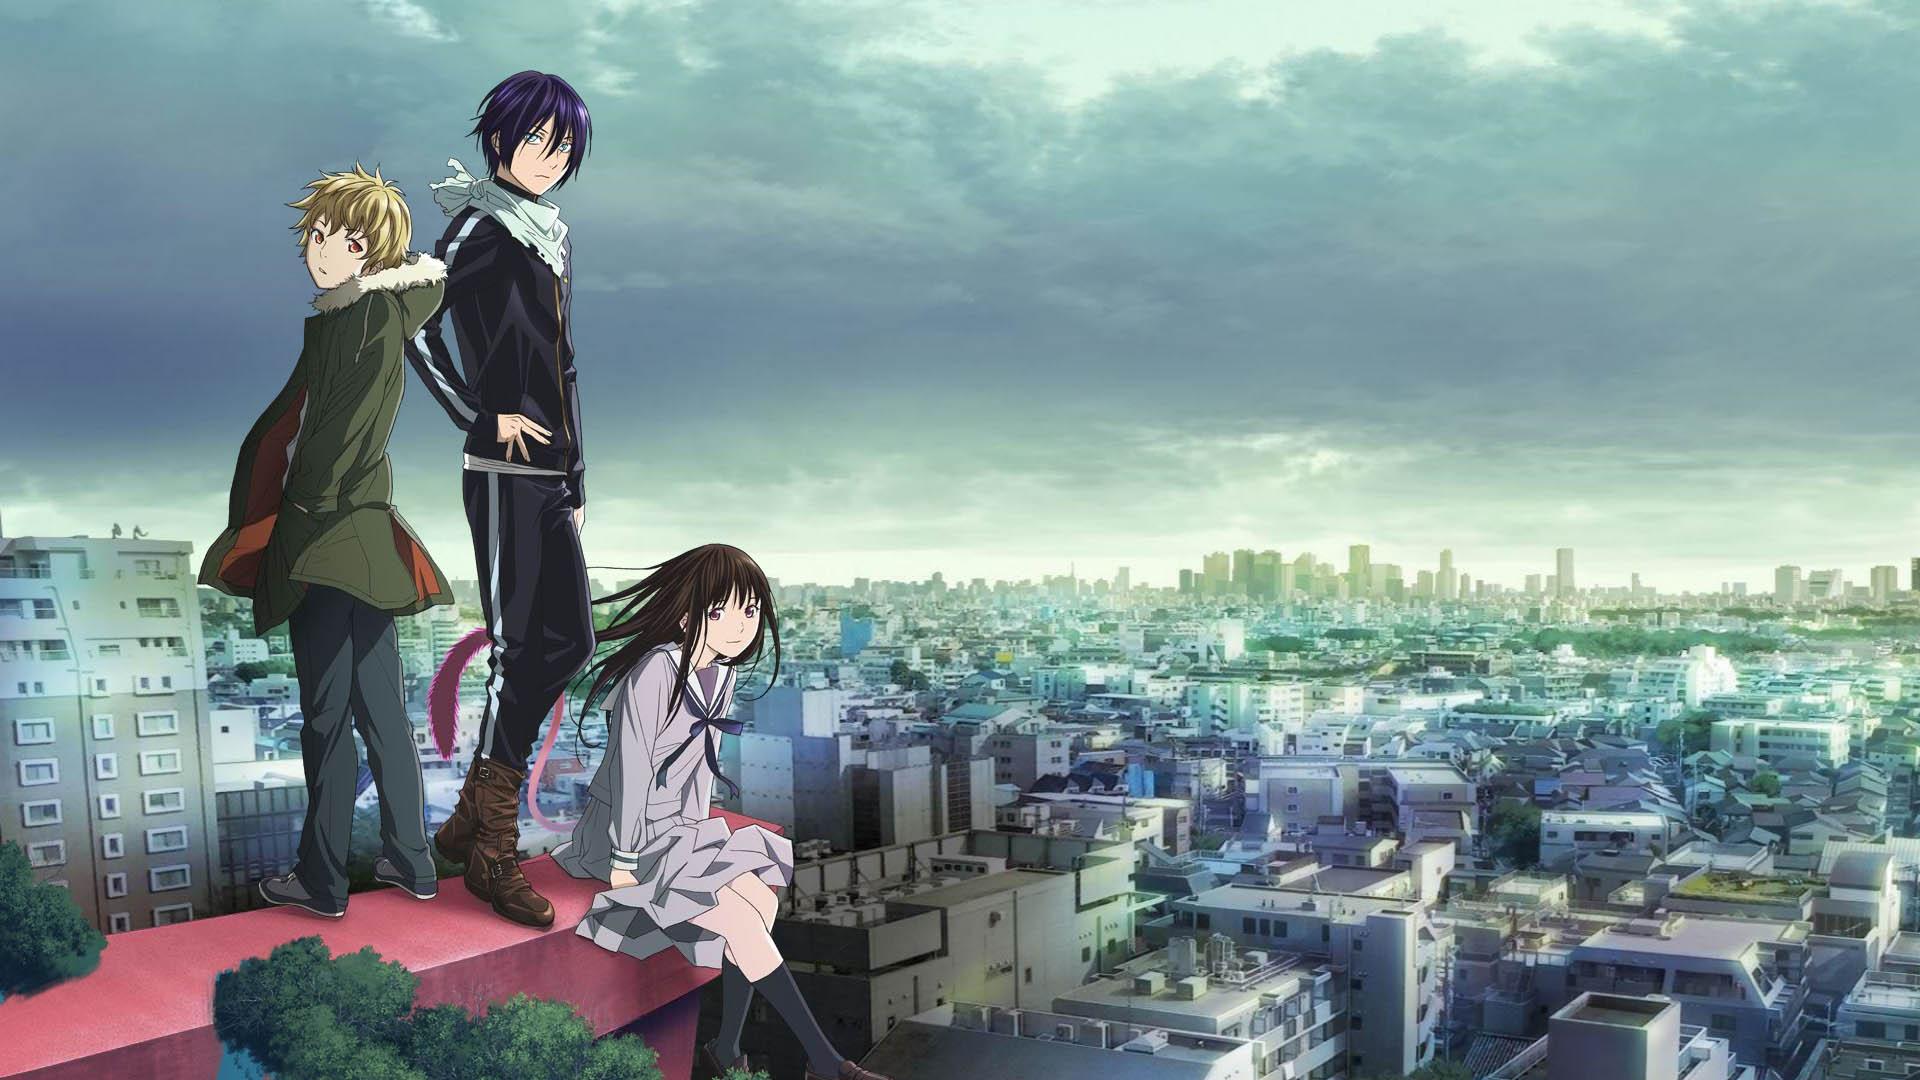 Noragami PS4 Banner, can someone please resize it?